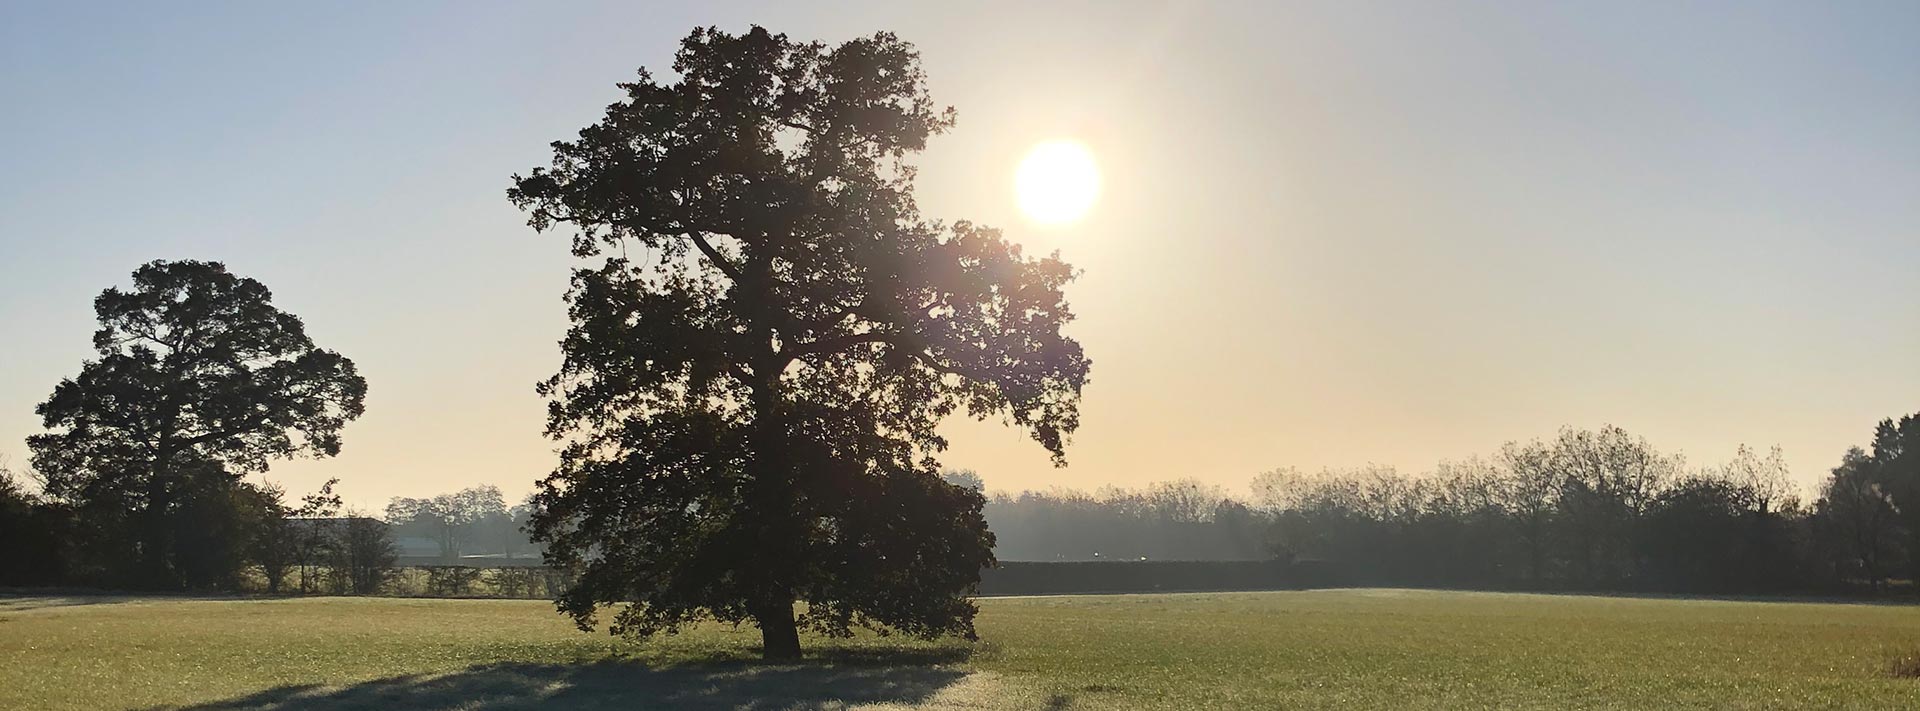 a field of grass with a single large tree with the sun shining from behind